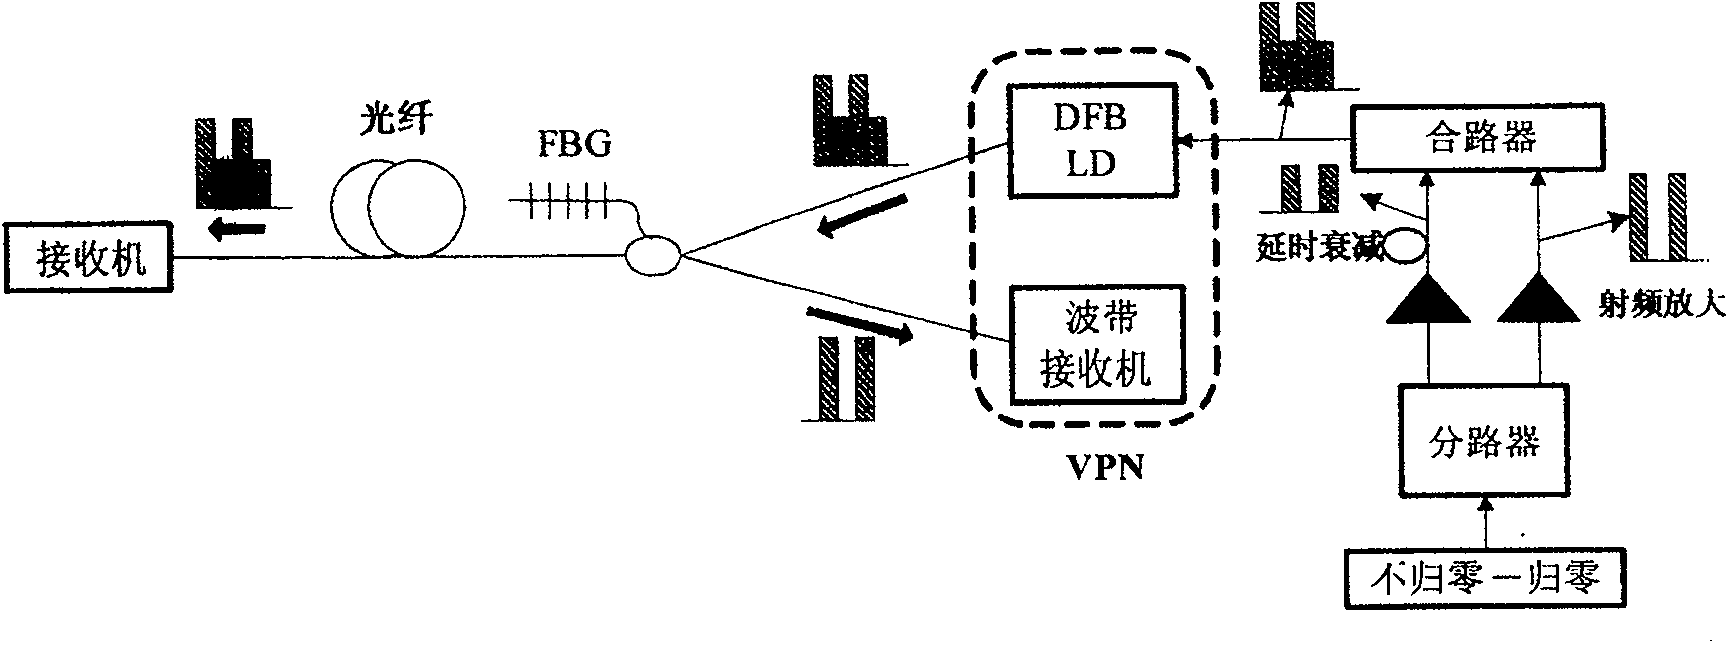 Method for implementing optical virtual private network in passive optical network